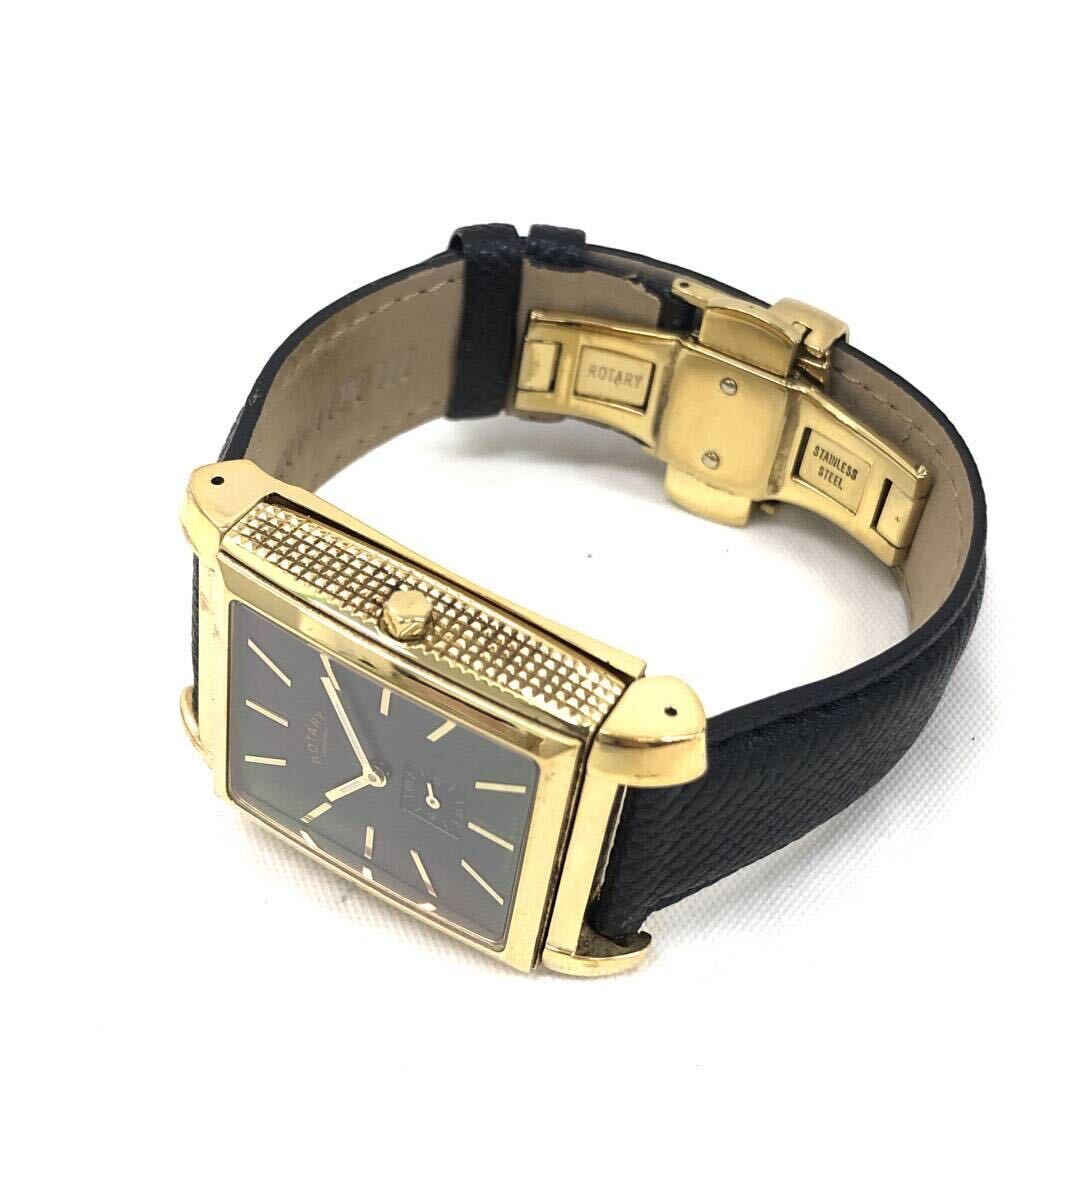 T03/067 ROTARY rotary smoseko Date attaching square Revell so both sides accessory clock wristwatch black / Gold 